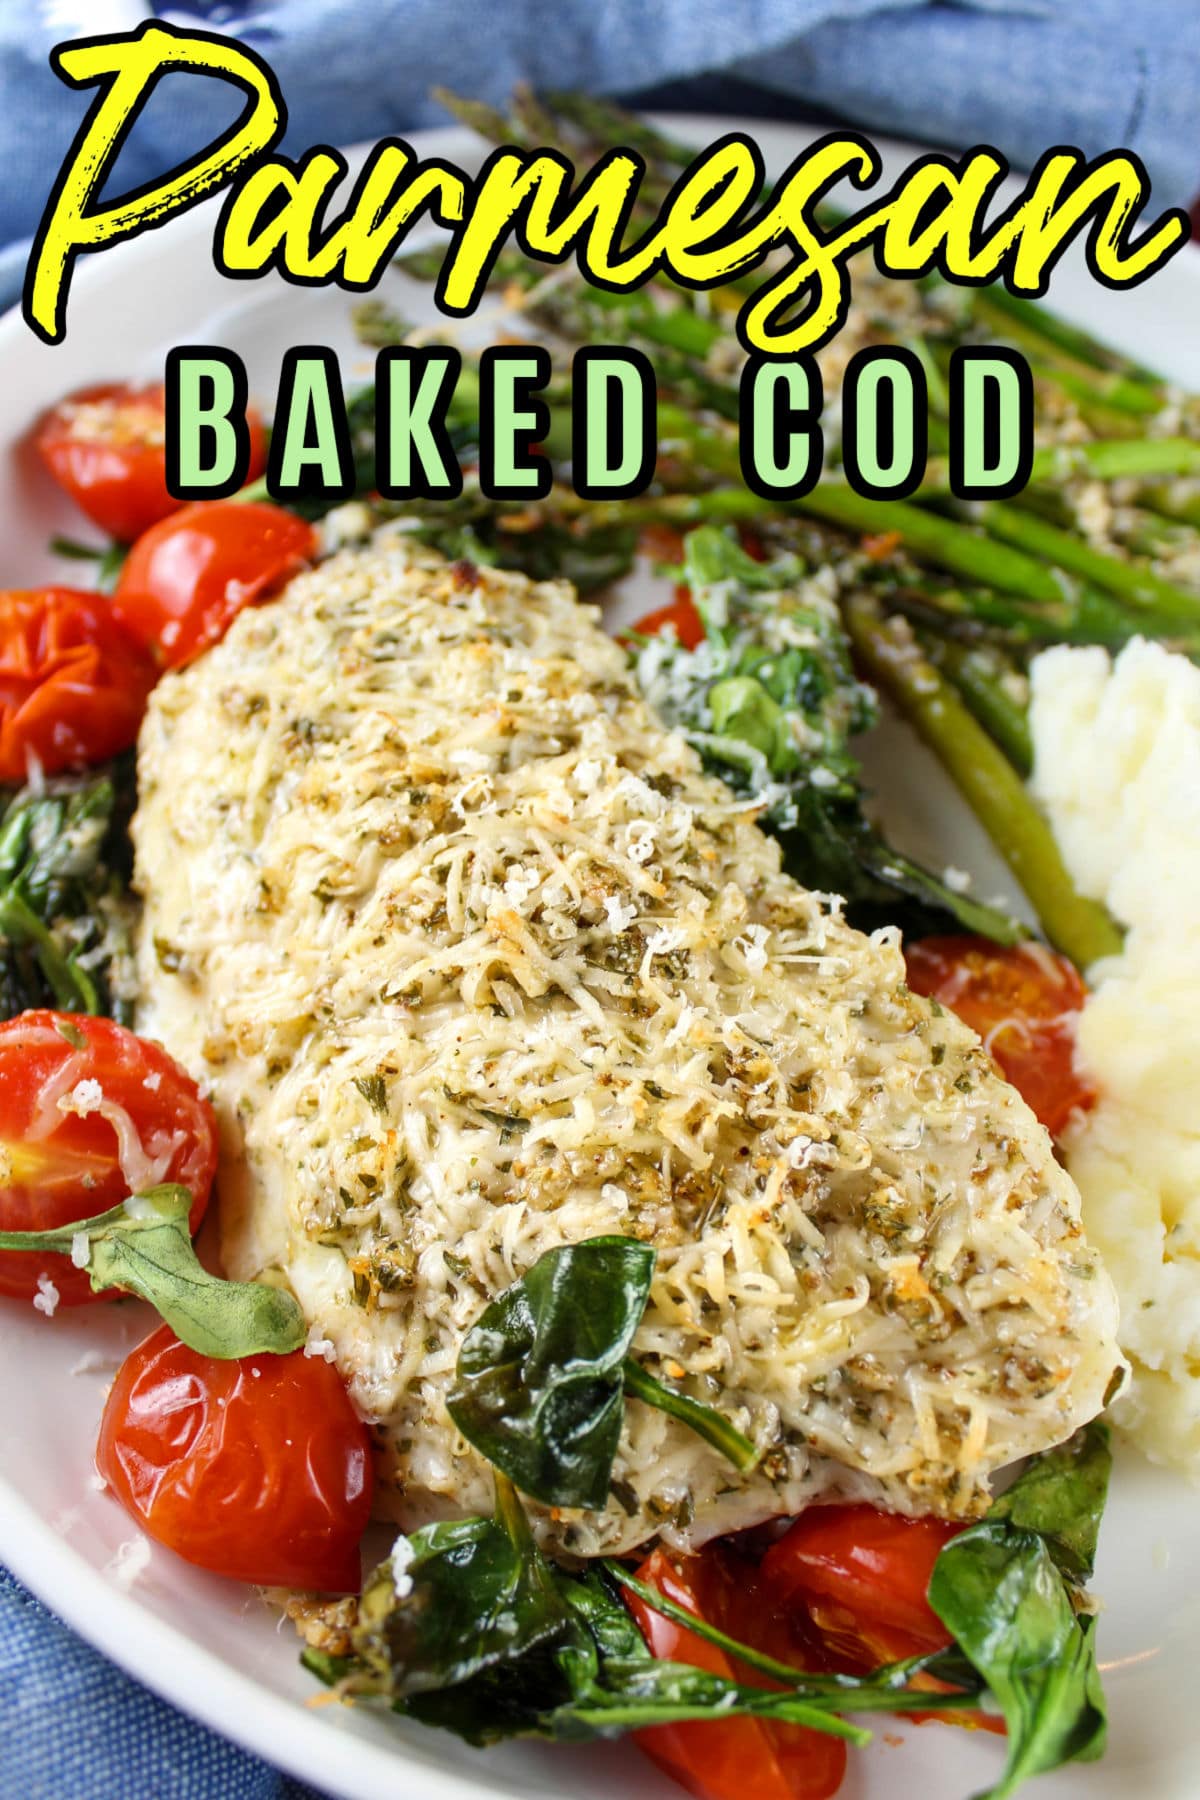 Parmesan Baked Cod is my favorite fish dish! Lightly coated with parmesan, garlic and lemon herb - this dish is quickly baked to flaky perfection. This healthy dish is on the table in under 20 minutes!  via @foodhussy